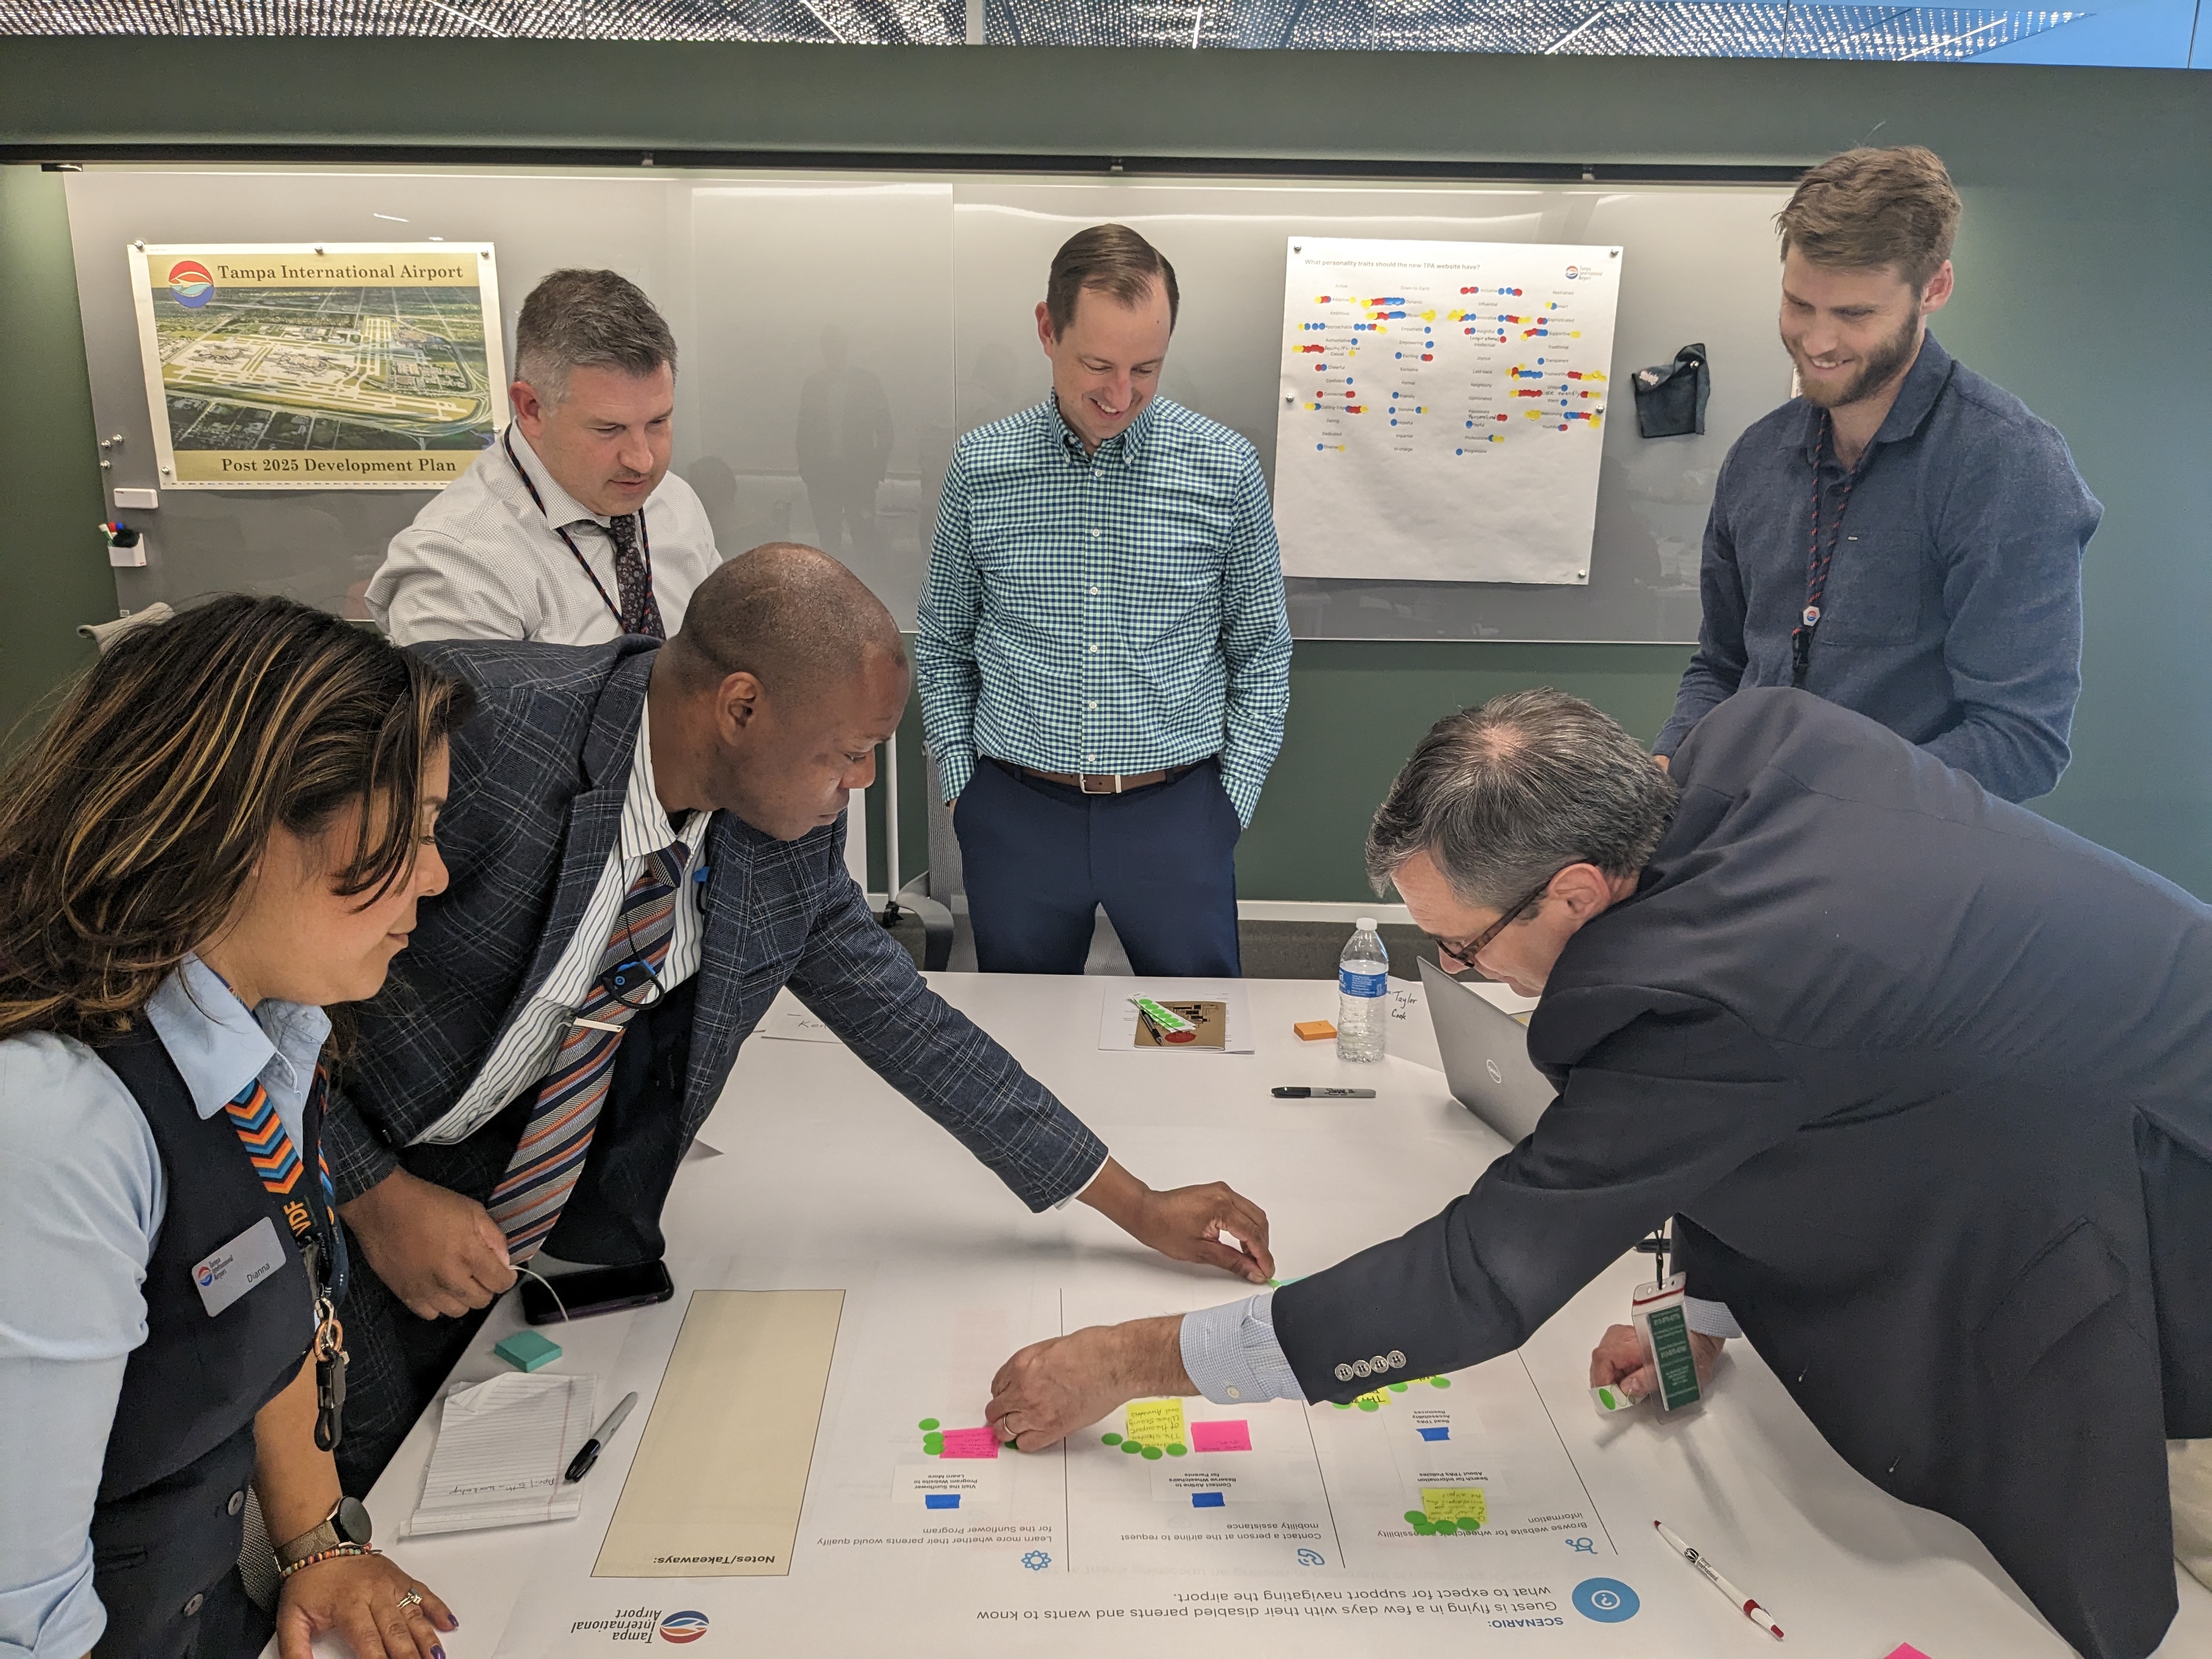 Five staff members from Tampa International Airport placing cards on a poster during a UX workshop with an Aten project team member observing